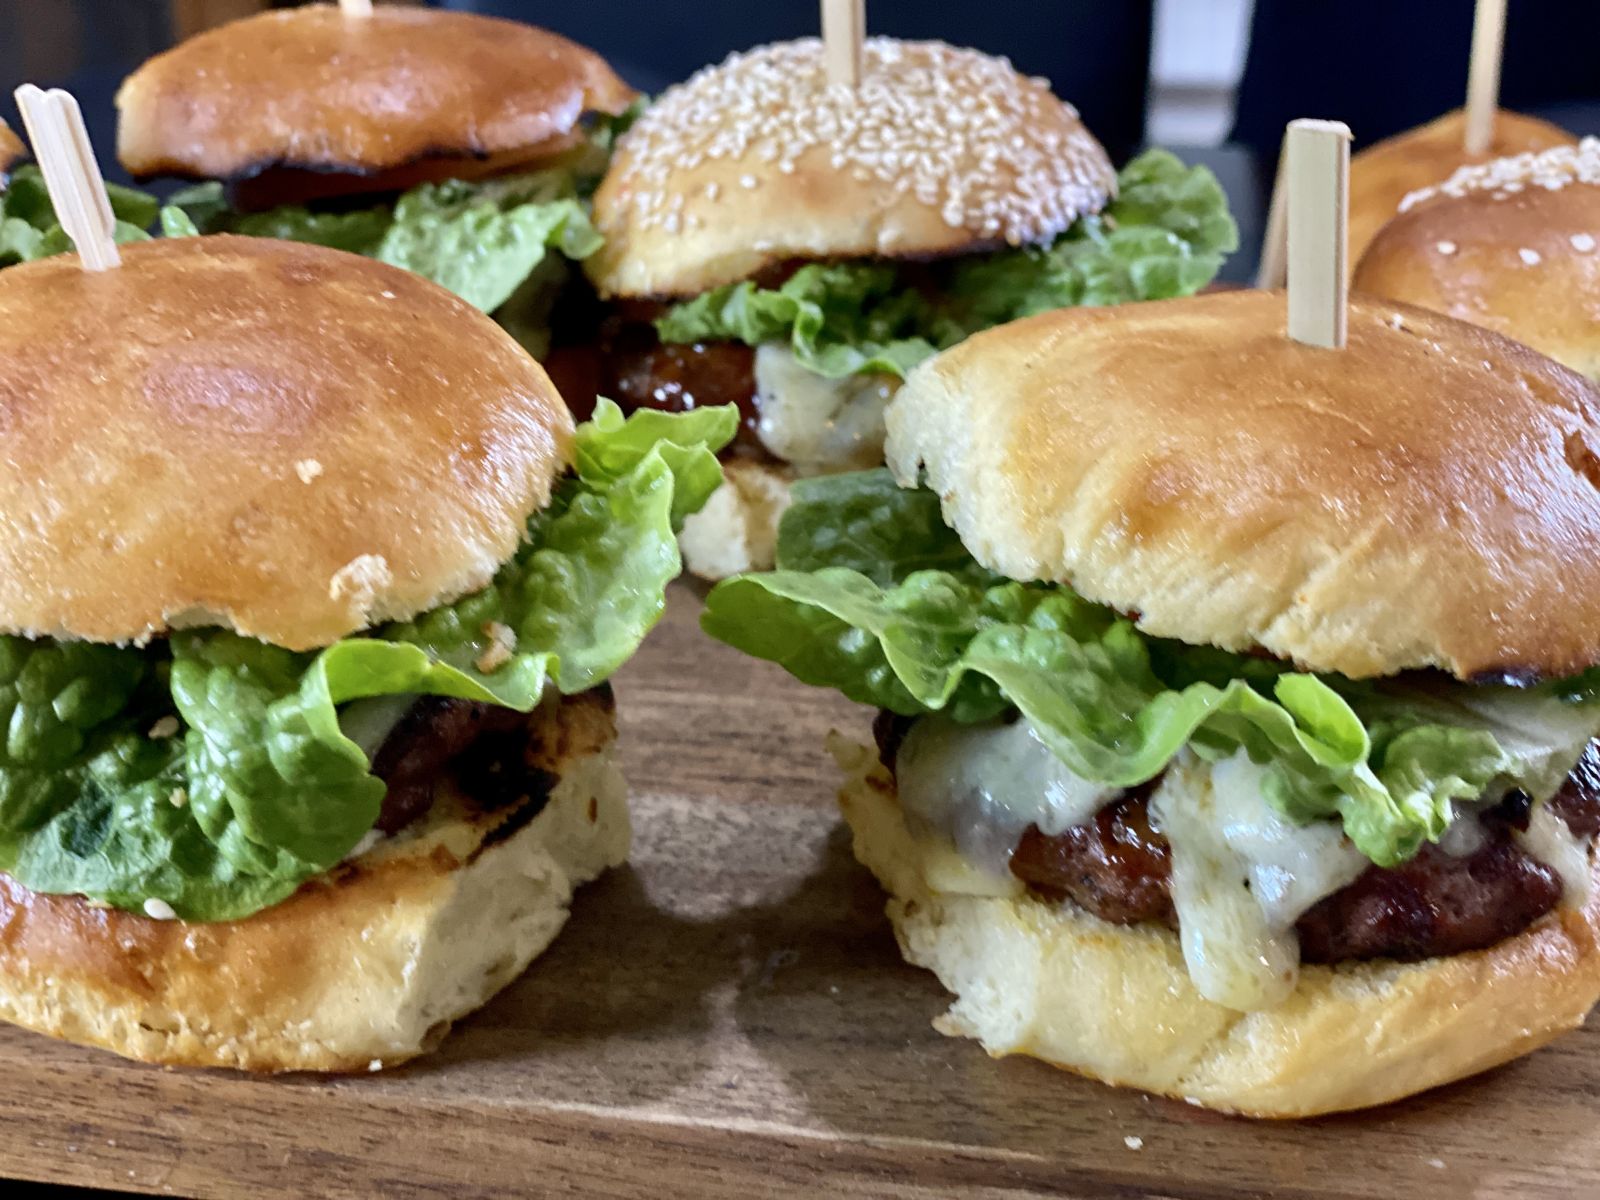 Home made BBQ beef burgers with lettuce and melted cheese